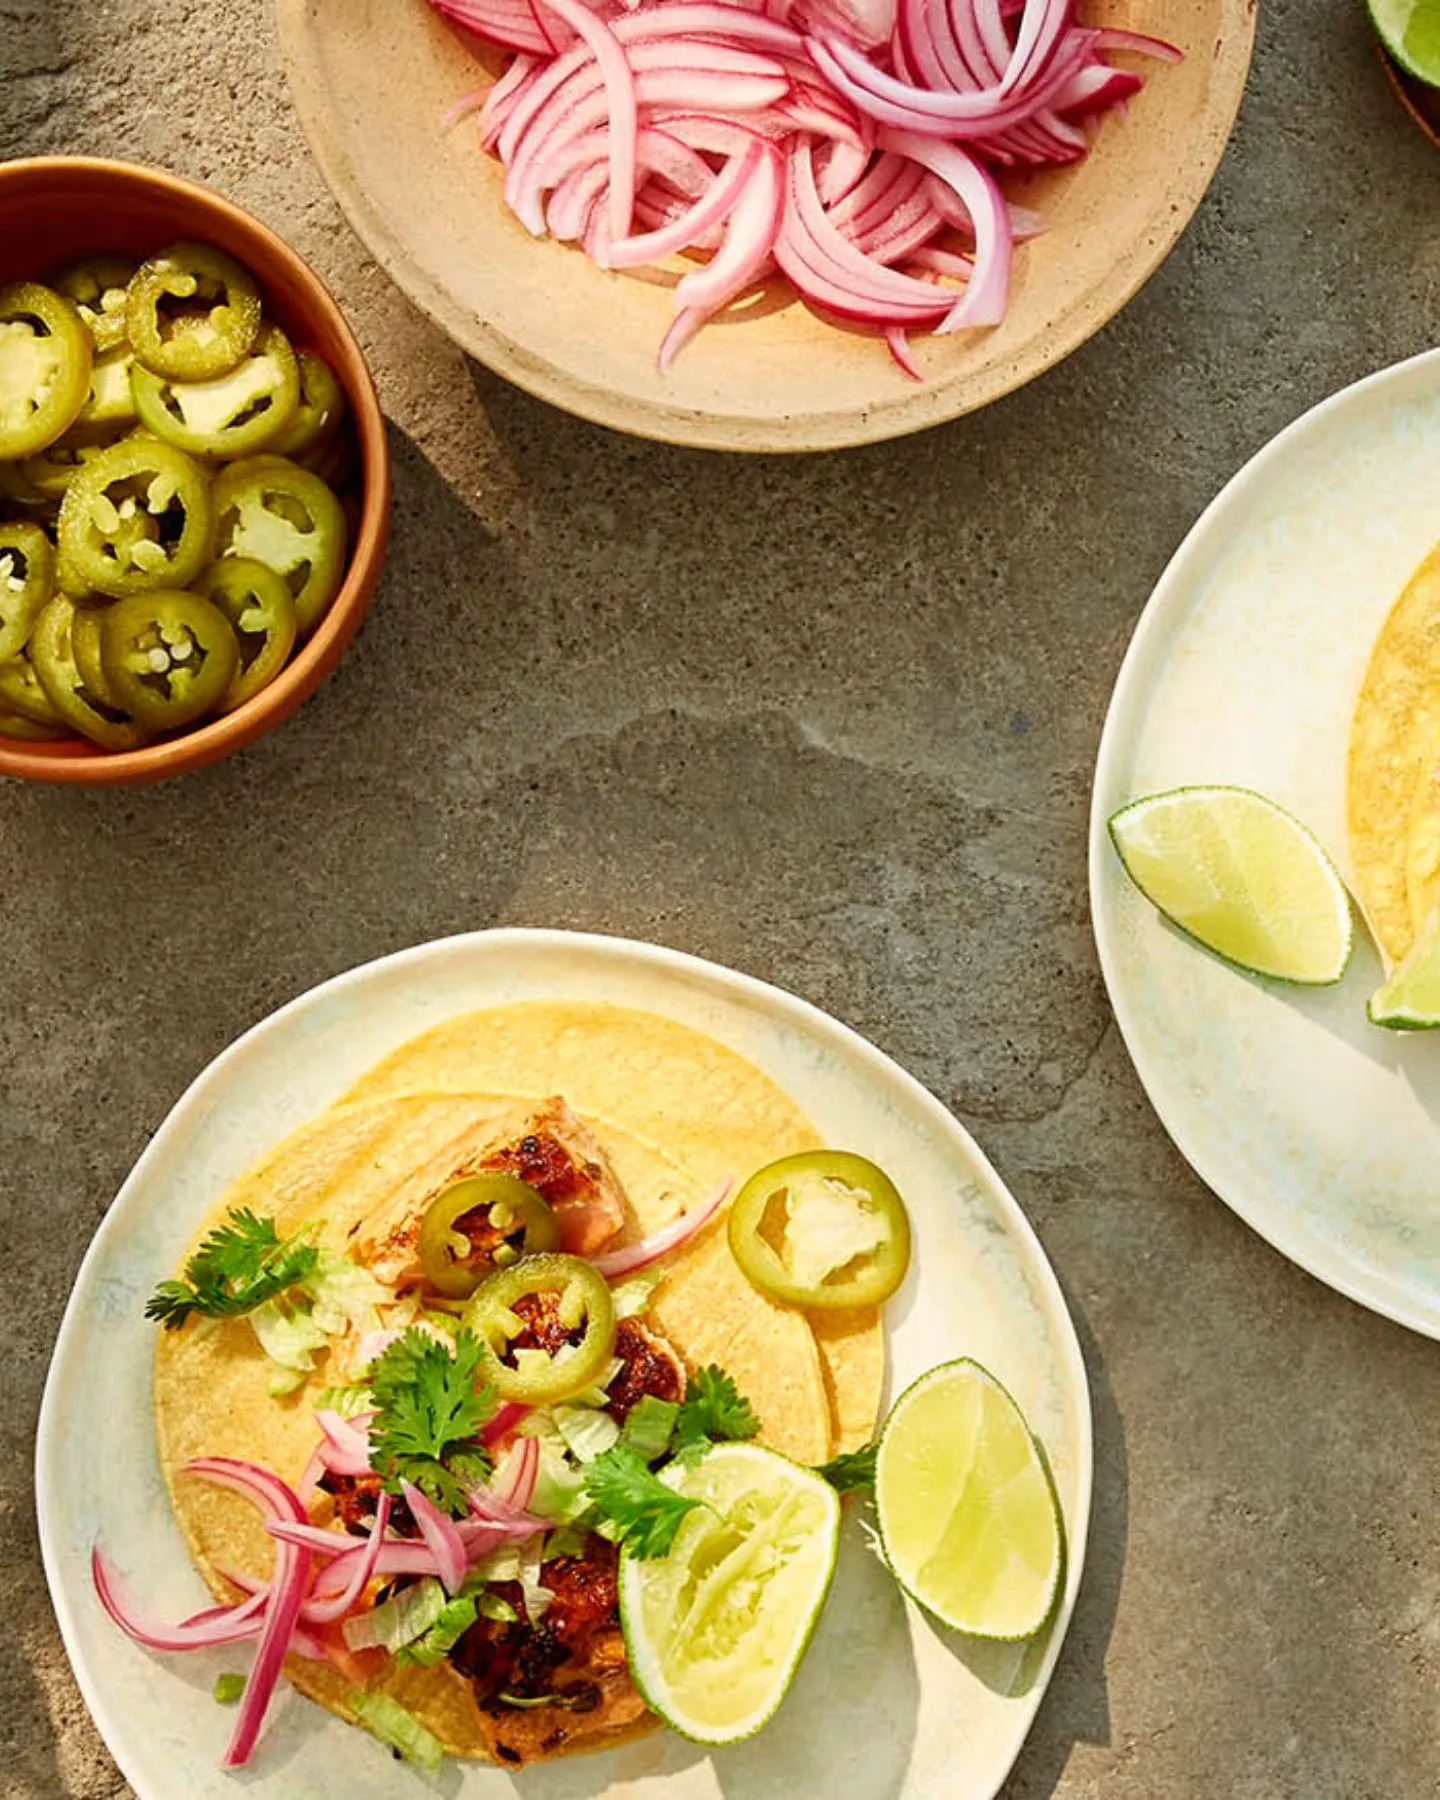 Try Our Fresh Take on Taco Tuesday by Casa de Suna